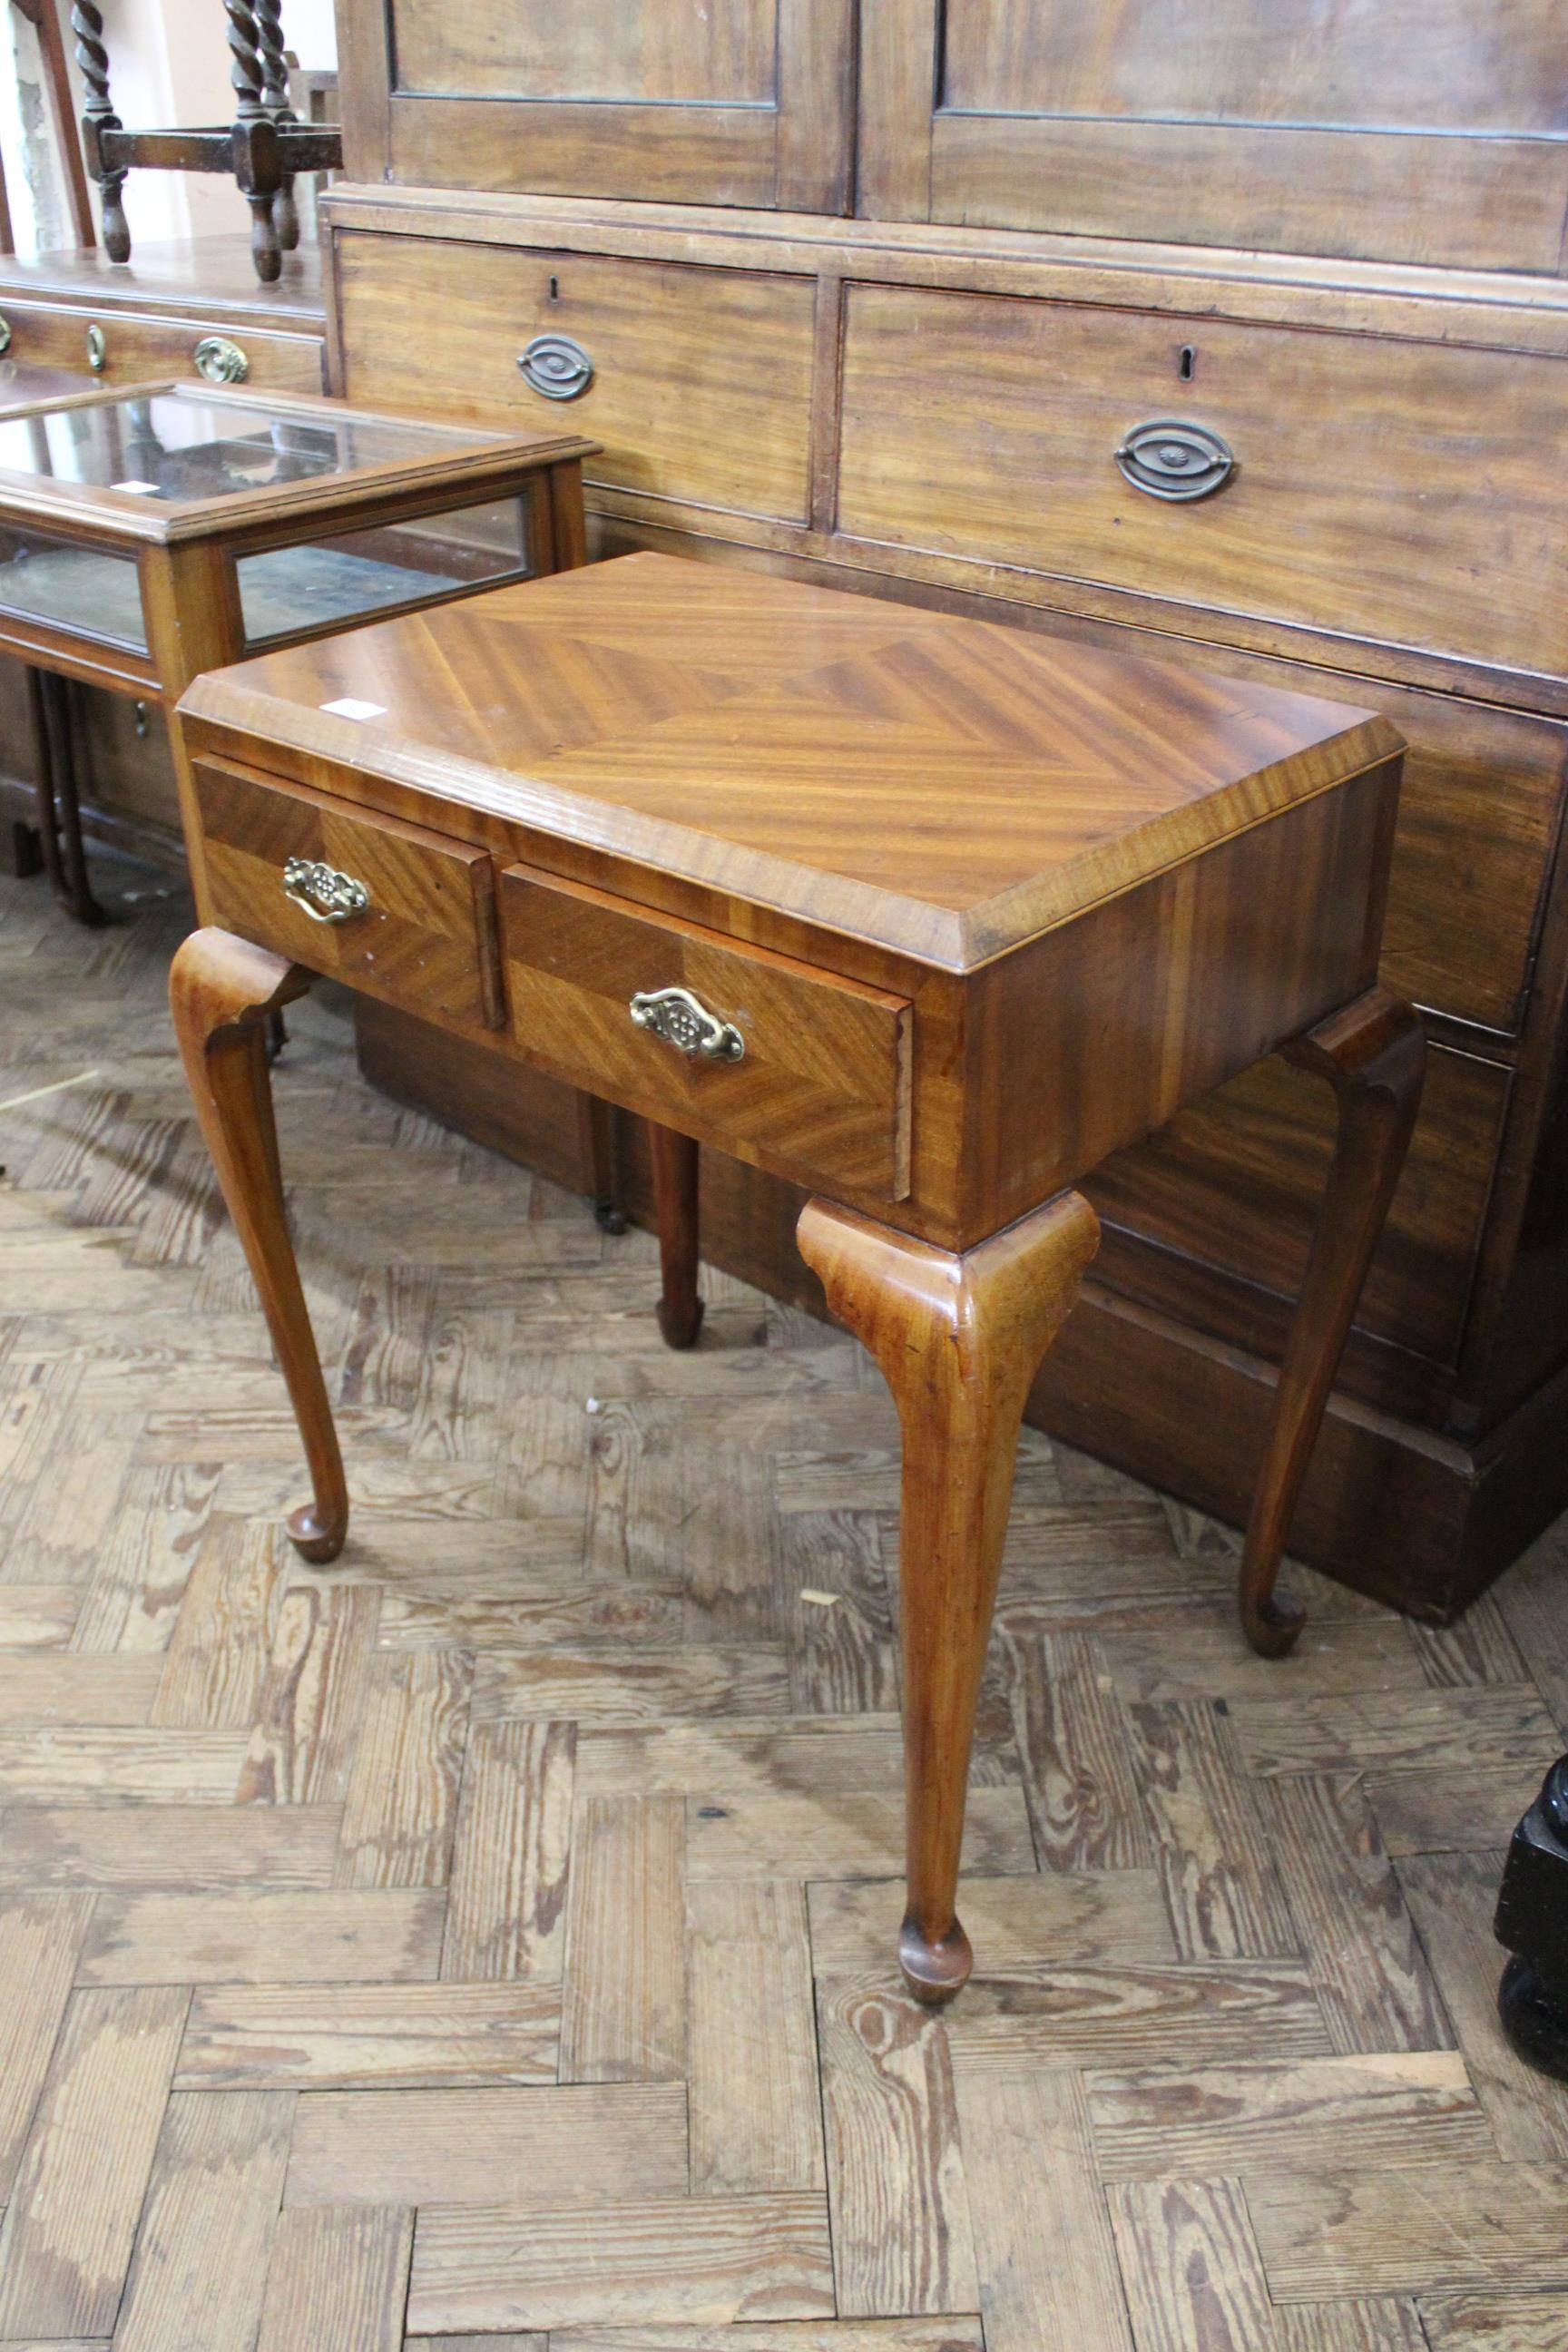 A Queen Anne style two drawer mahogany side table on cabriole legs